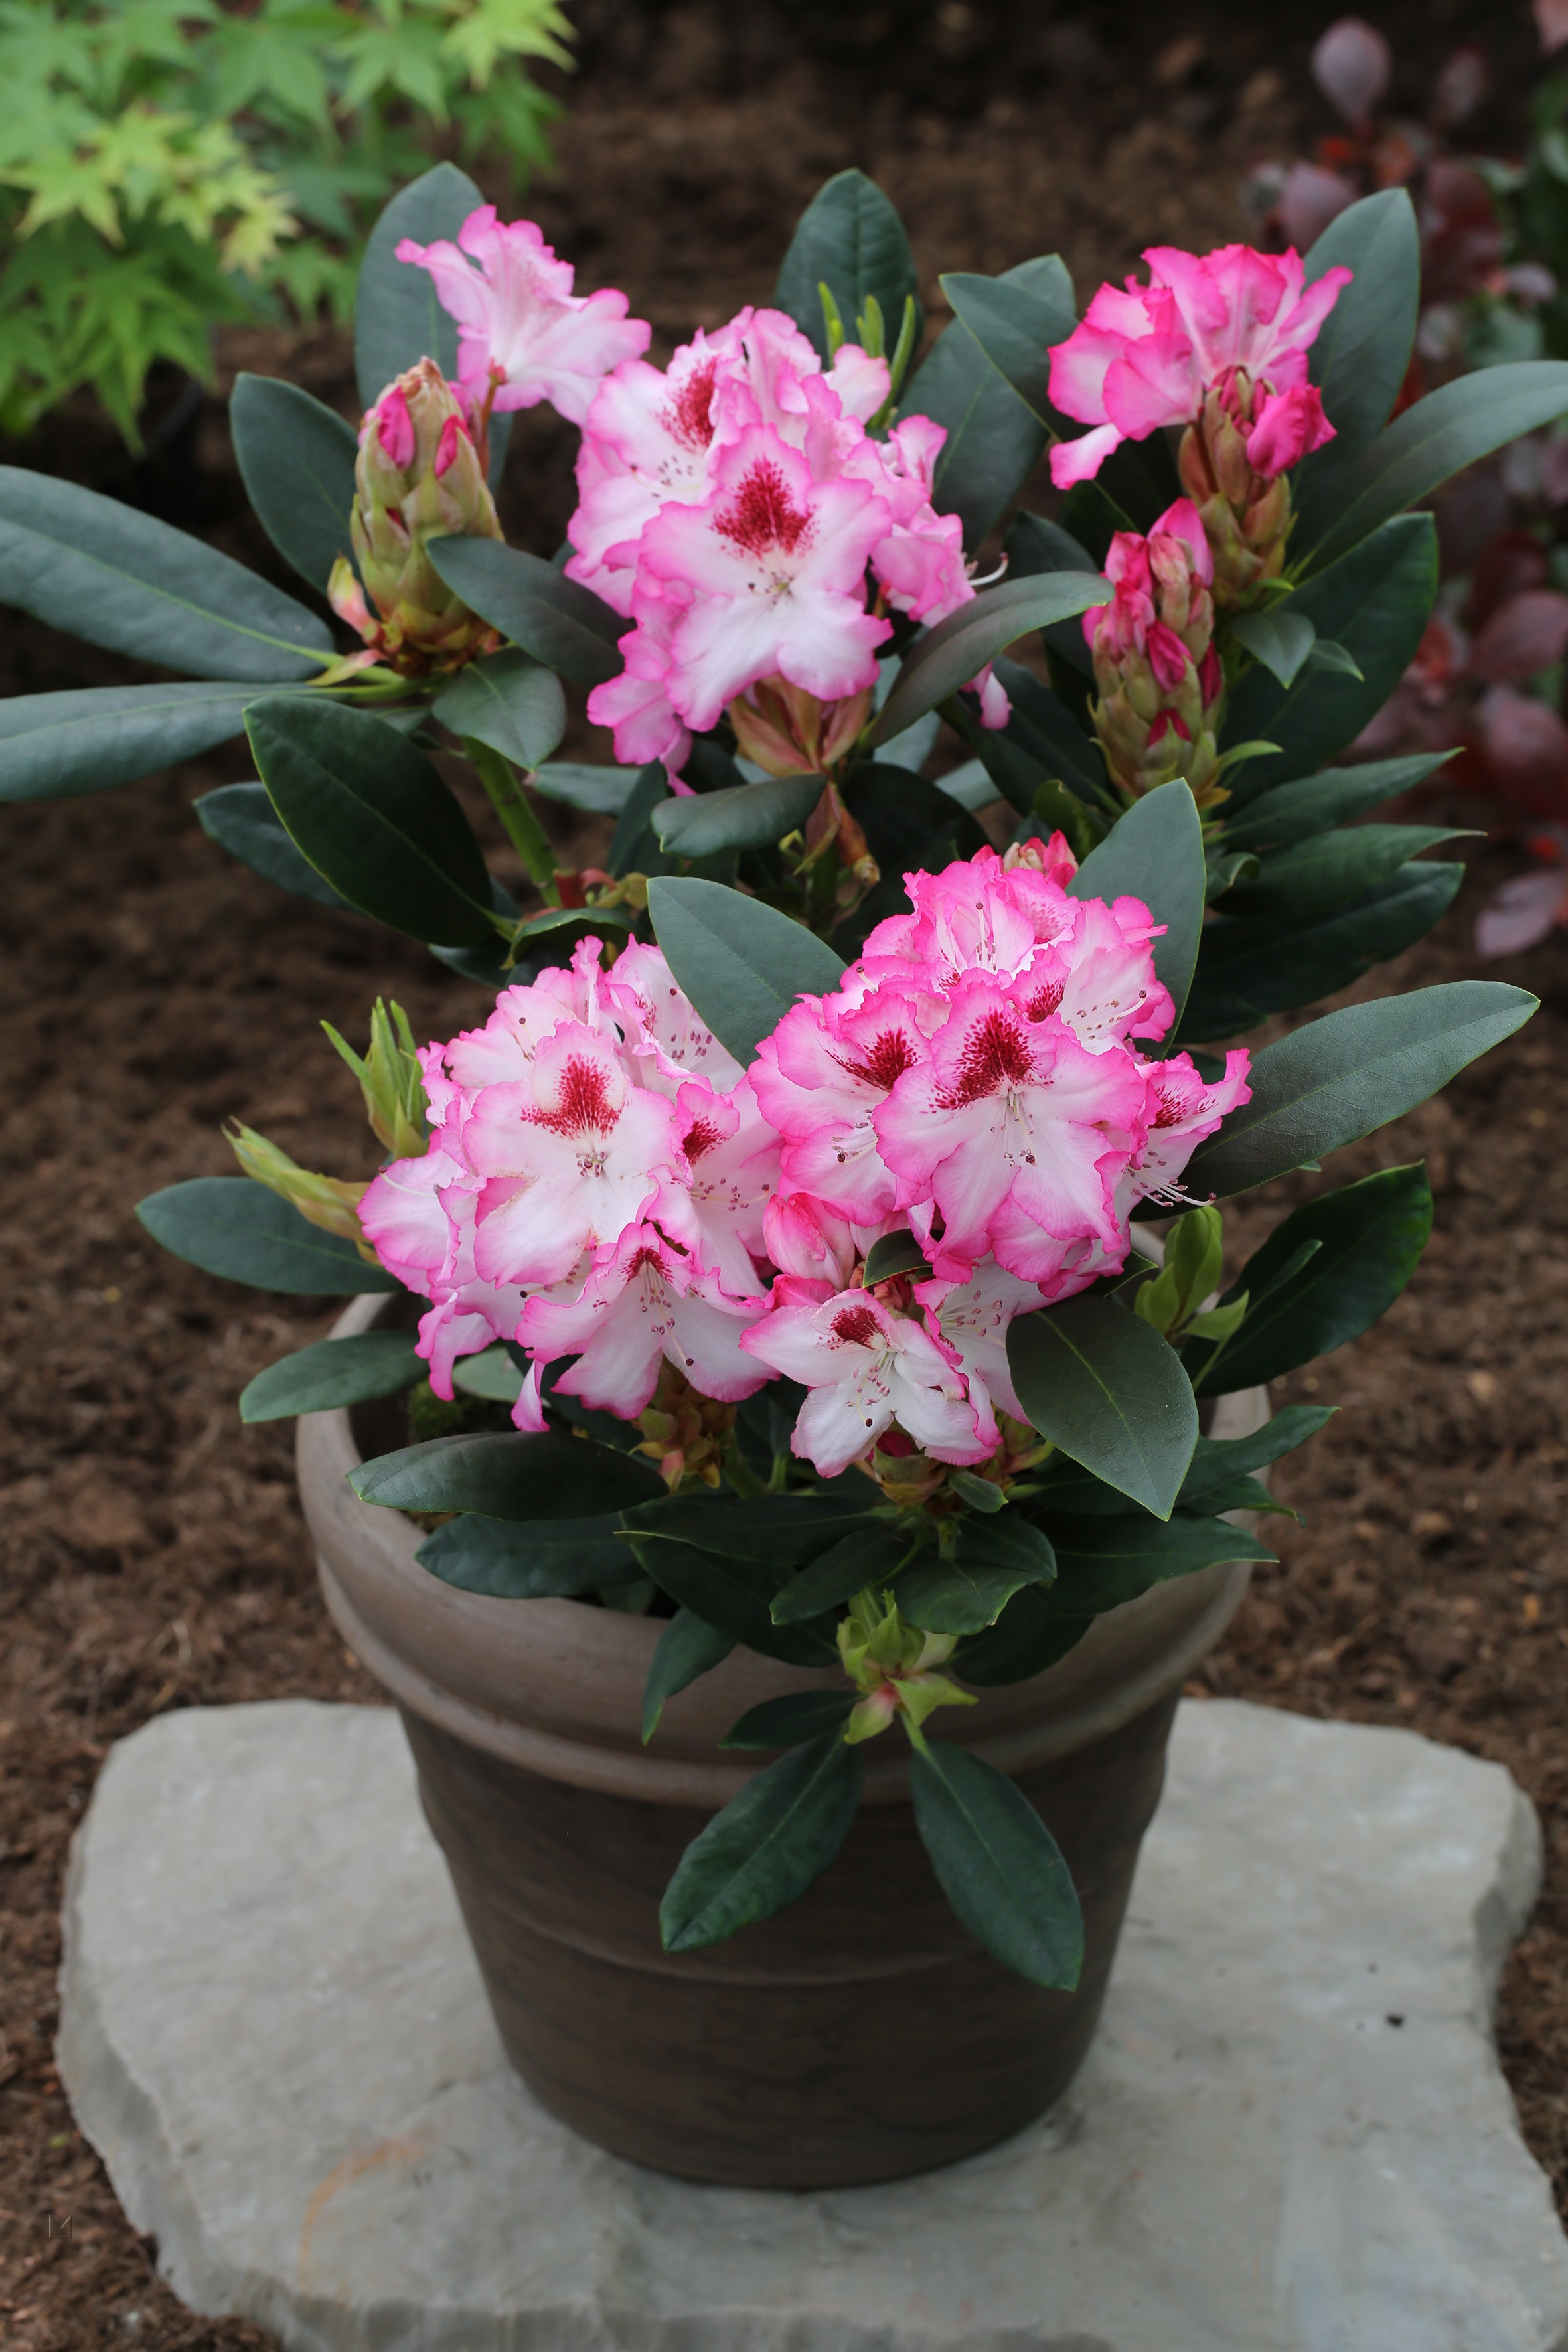 Rhododendron Hybride 'Hachmann's Charmant' -S-